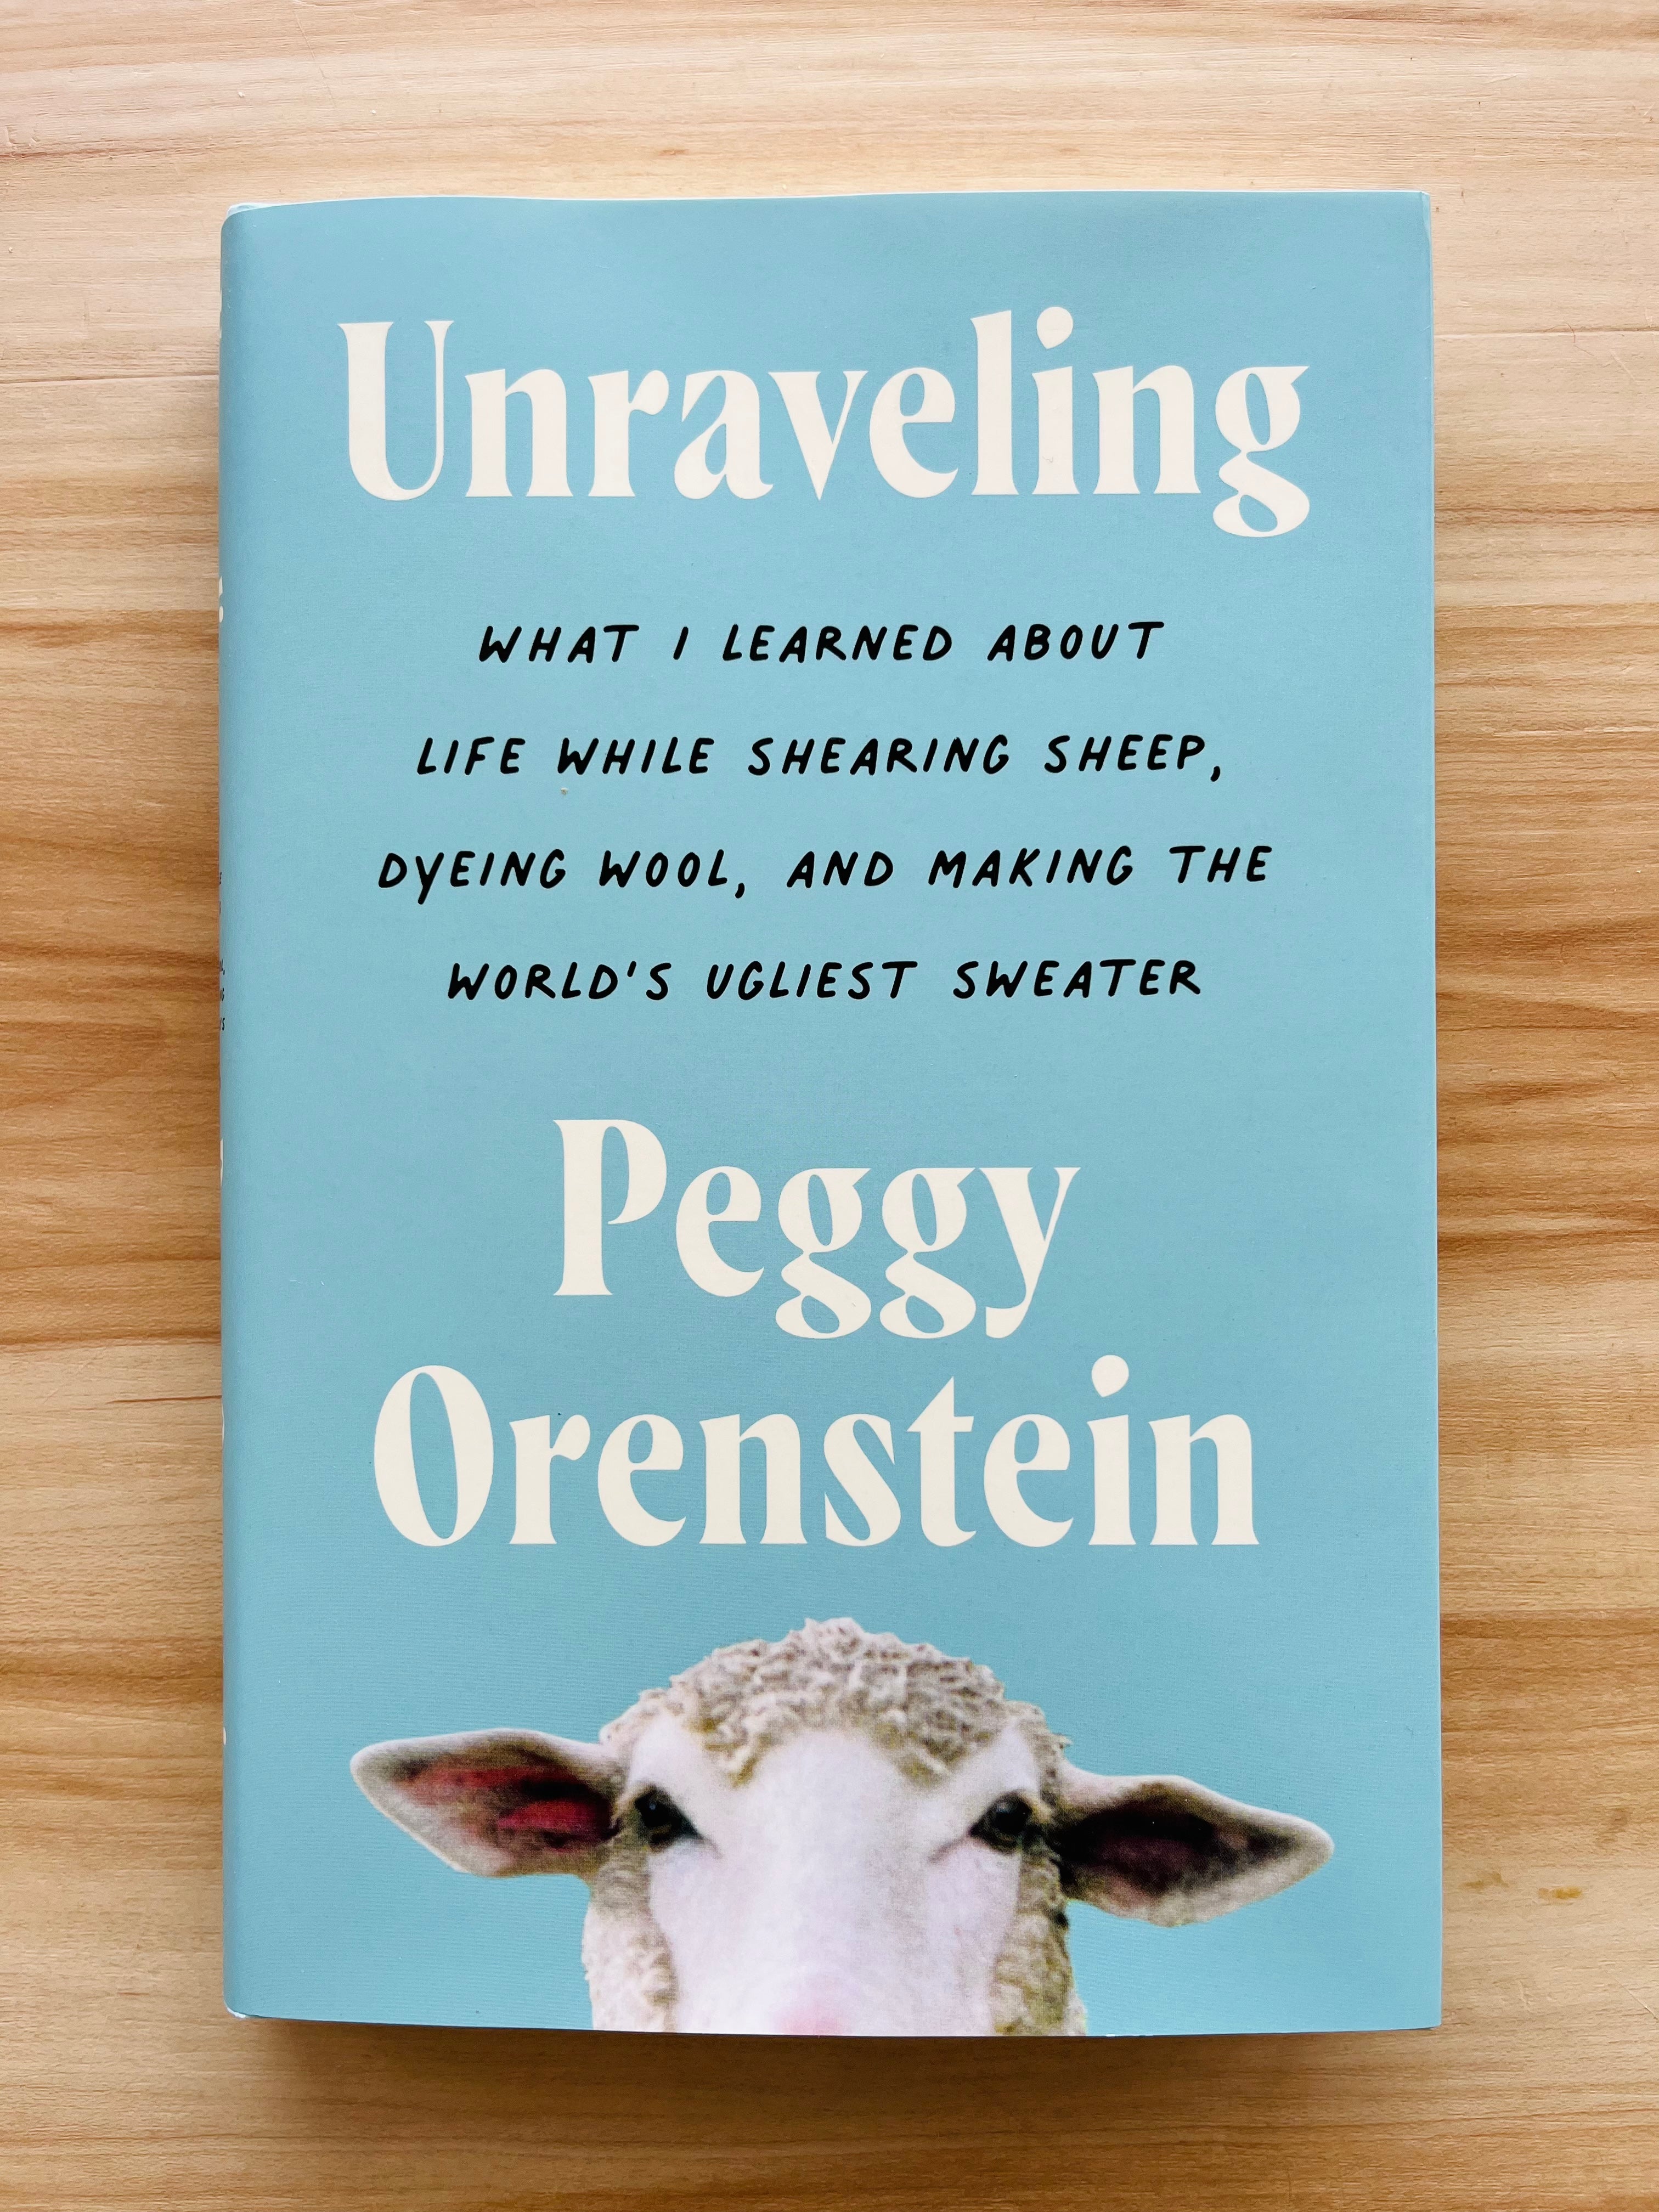 Unraveling by Peggy Orenstein